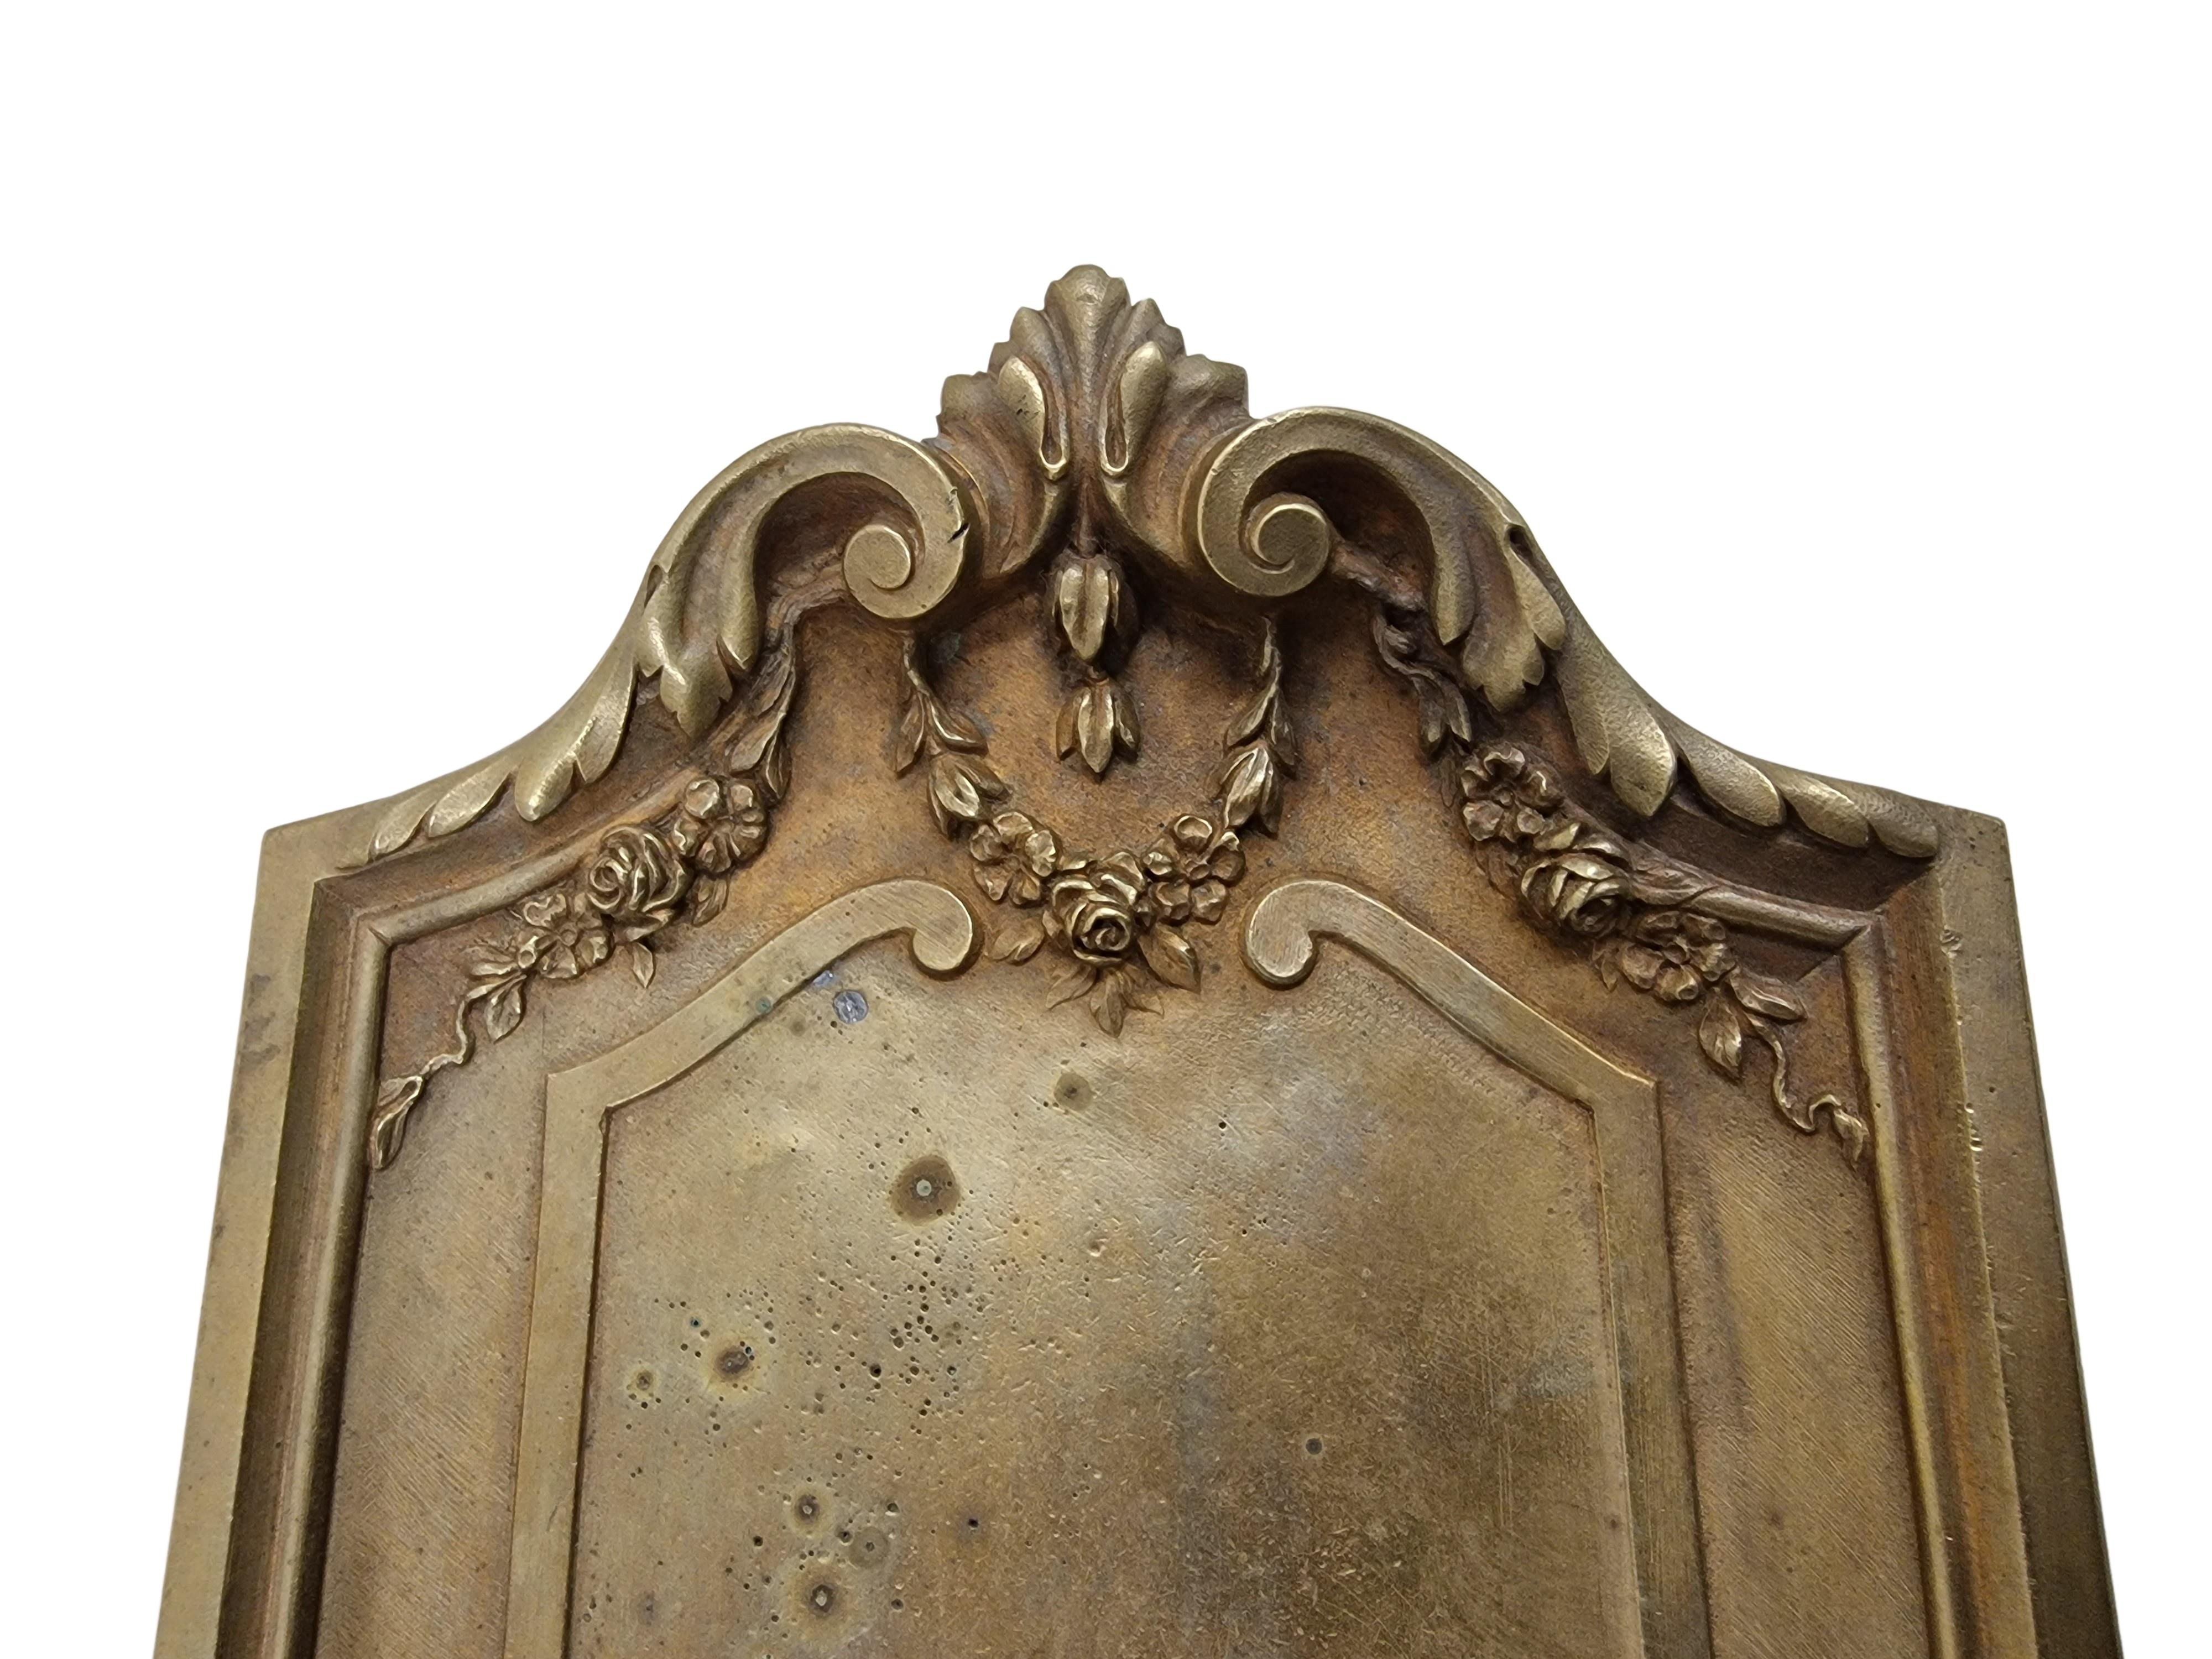 Rare business card tray, solid bronze around 1900, Jugendstil Art Nouveau France In Good Condition For Sale In Wien, AT